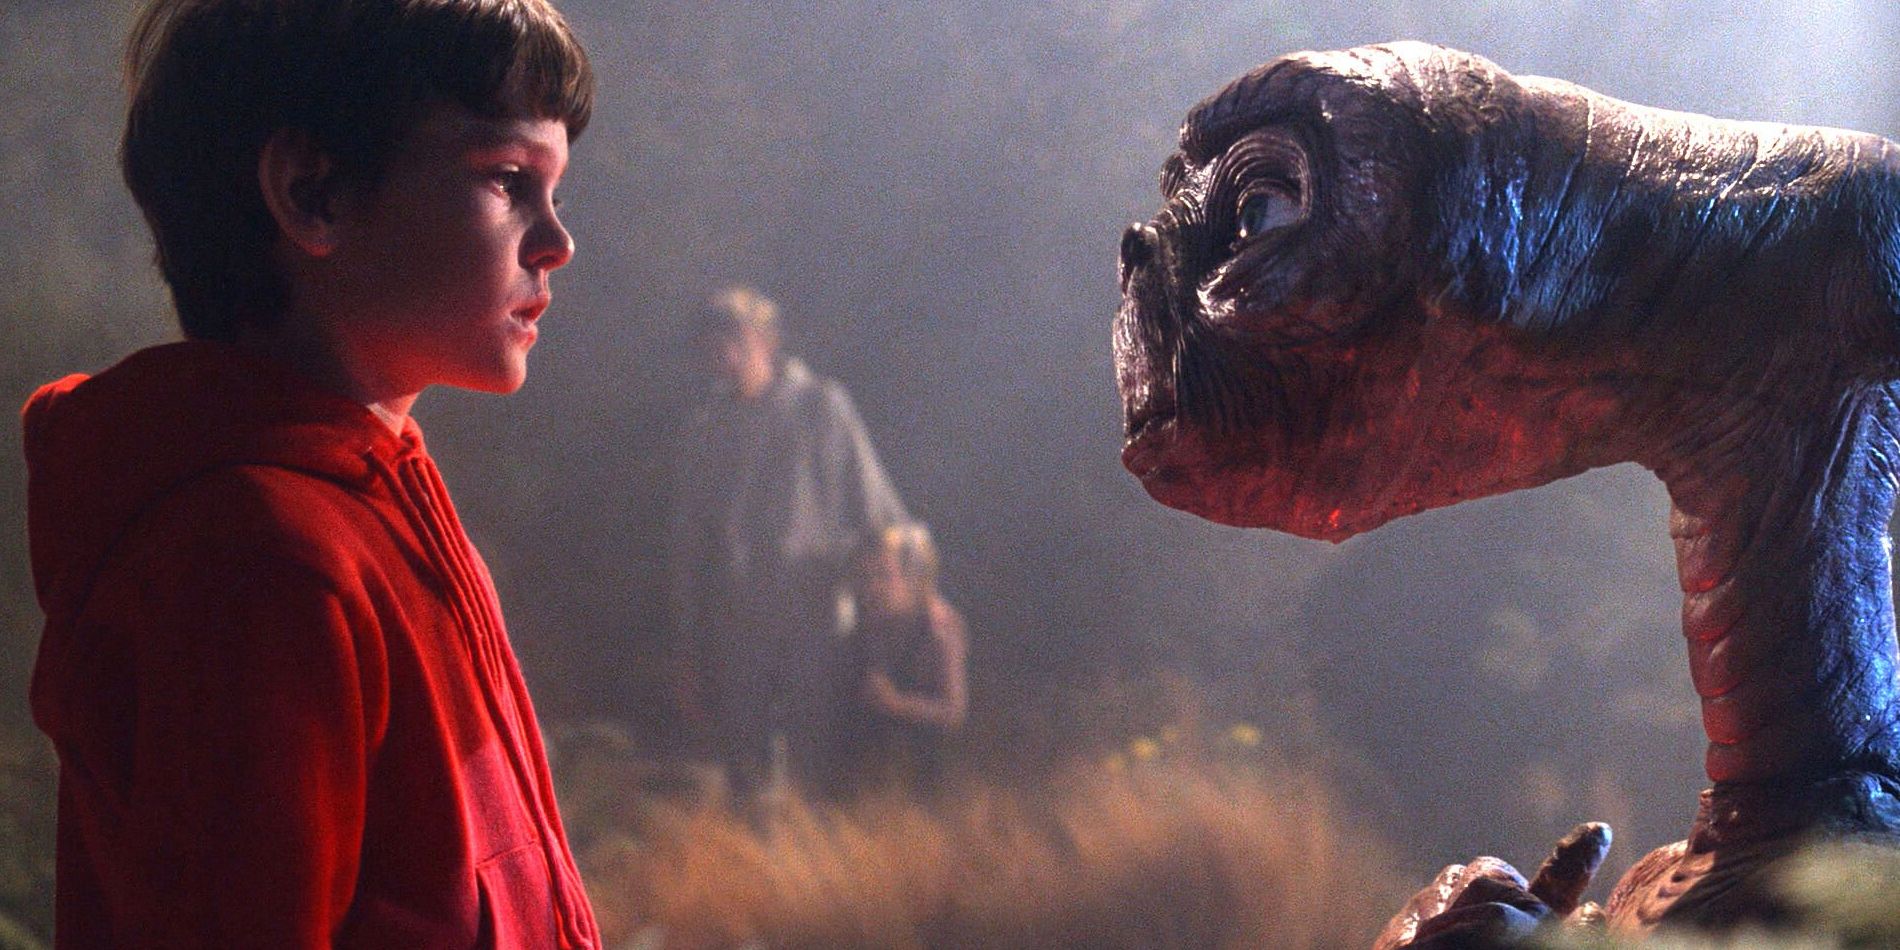 Elliott and E.T. looking at each other in the forest in E.T. The Extra-Terrestrial 